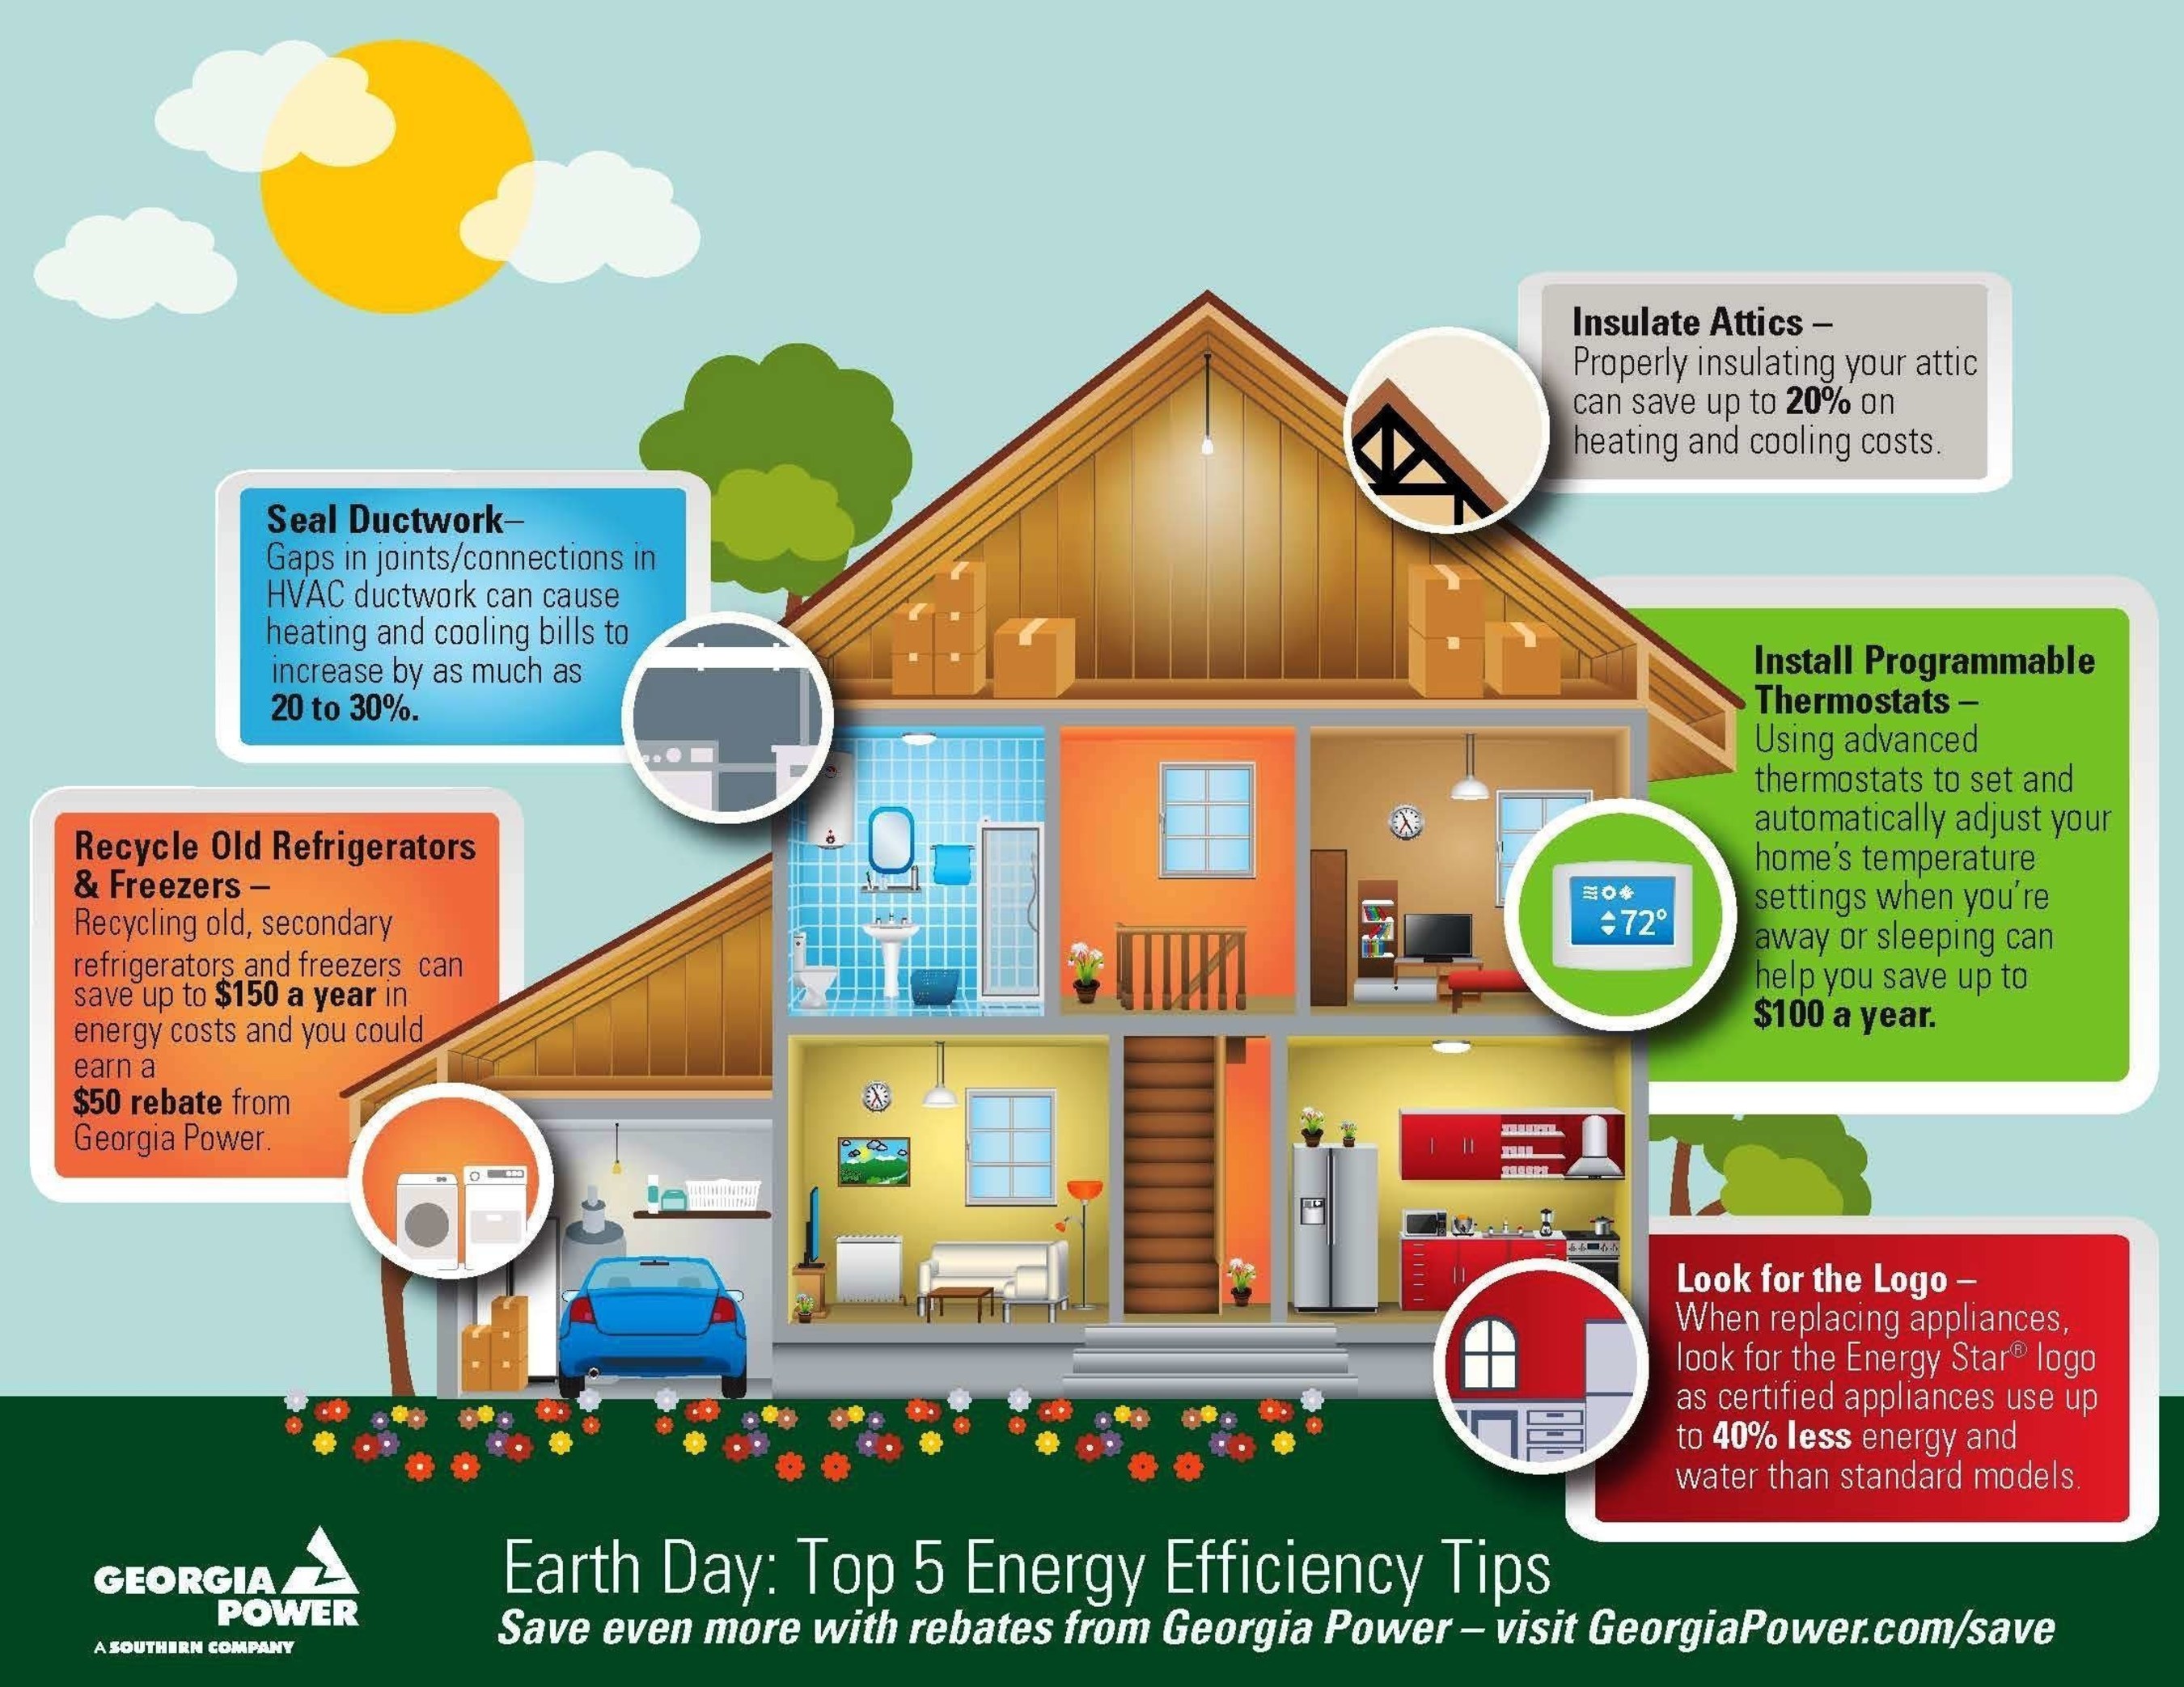 Georgia Power offers the Top 5 Energy Efficiency Tips for Earth Day 2015. Saving money and energy around the house is easy this Earth Day. Visit GeorgiaPower.com/Save for more ways to save, including available rebates and incentives.